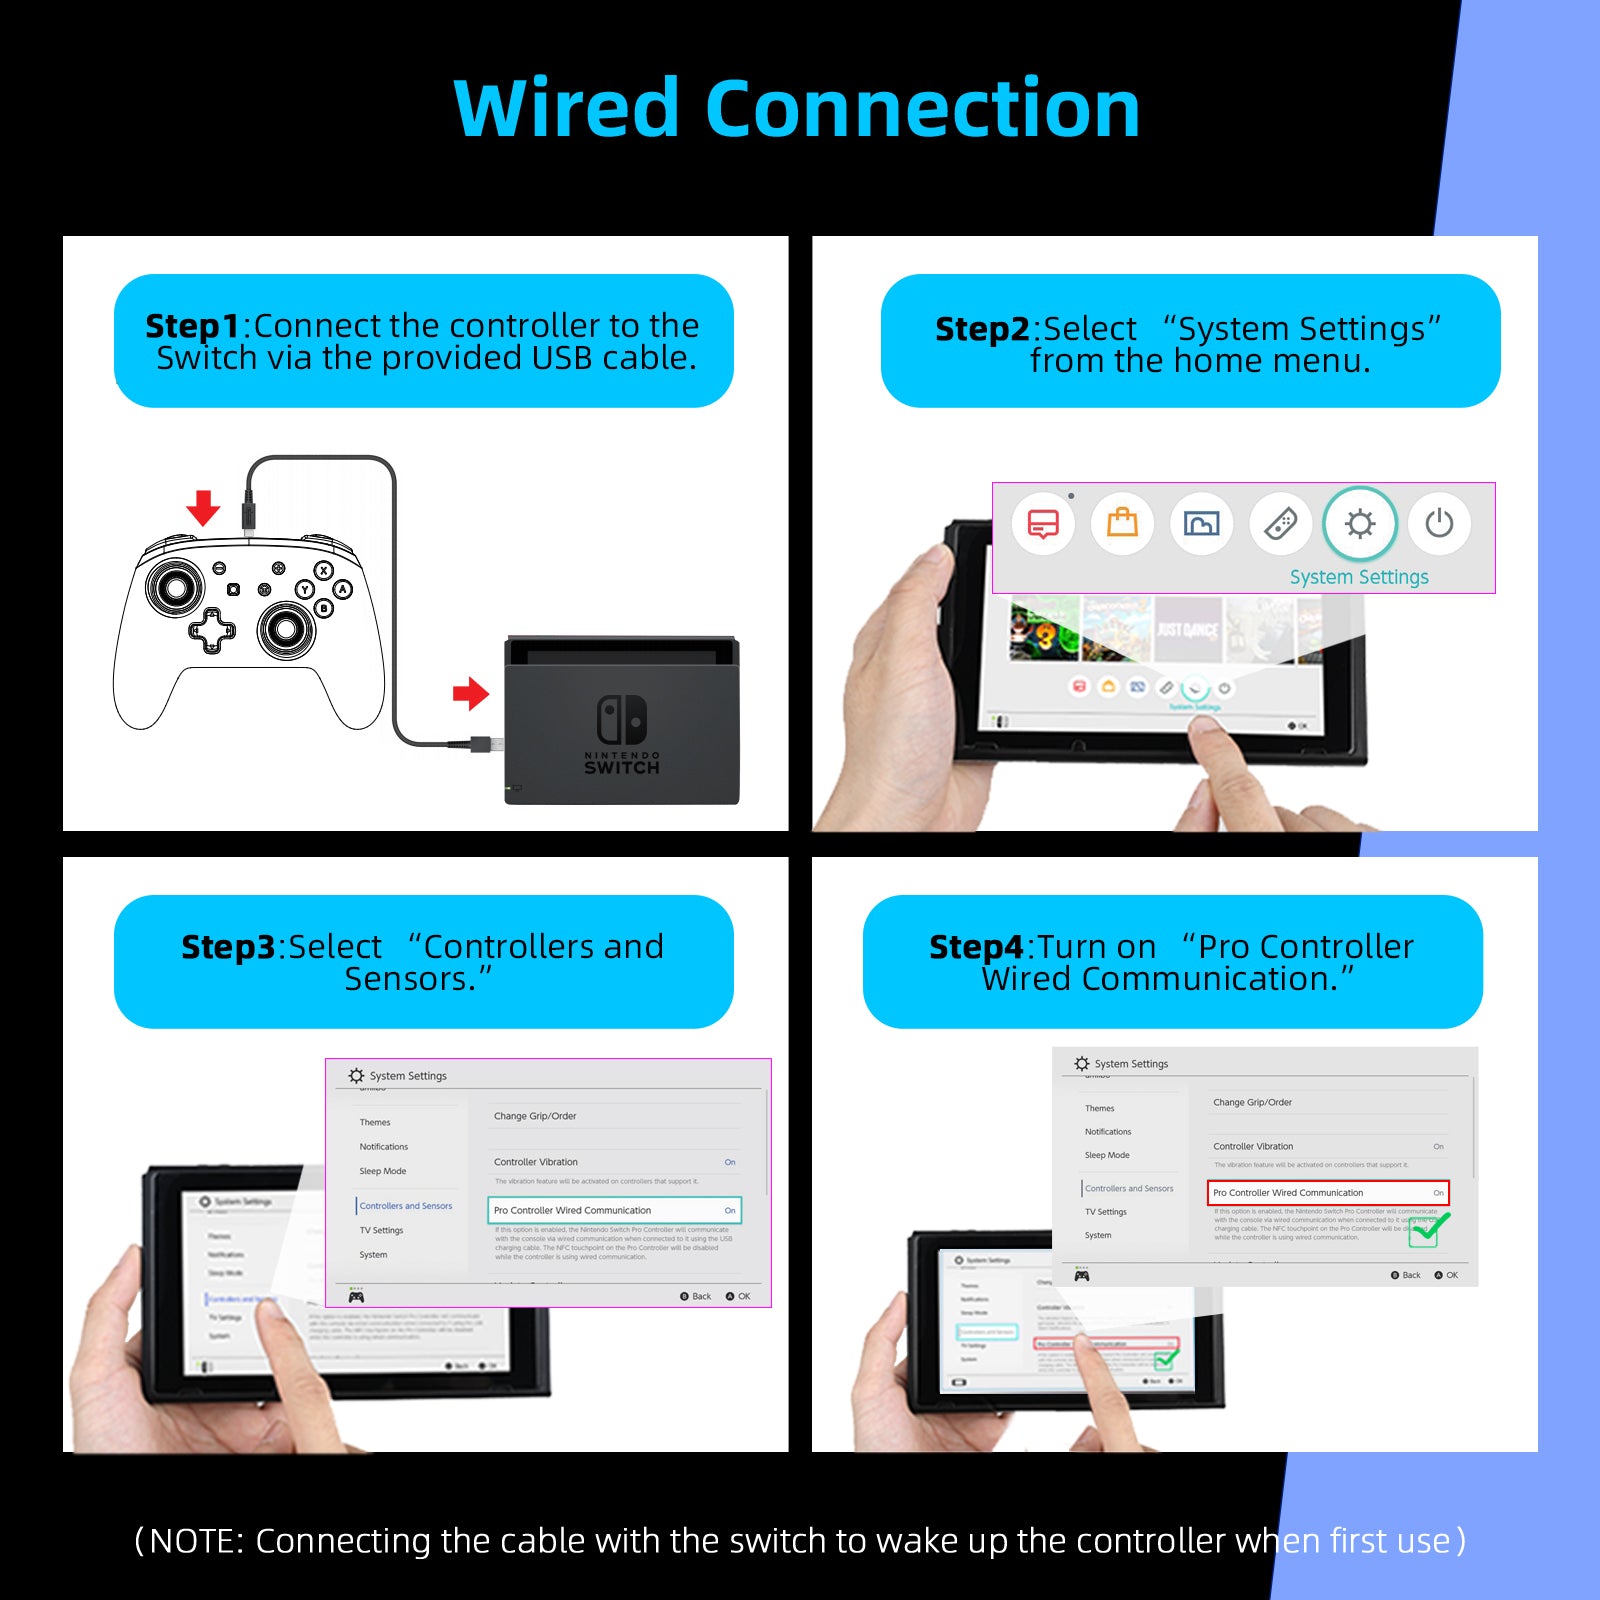 Provides guidelines for connecting via wired connection.